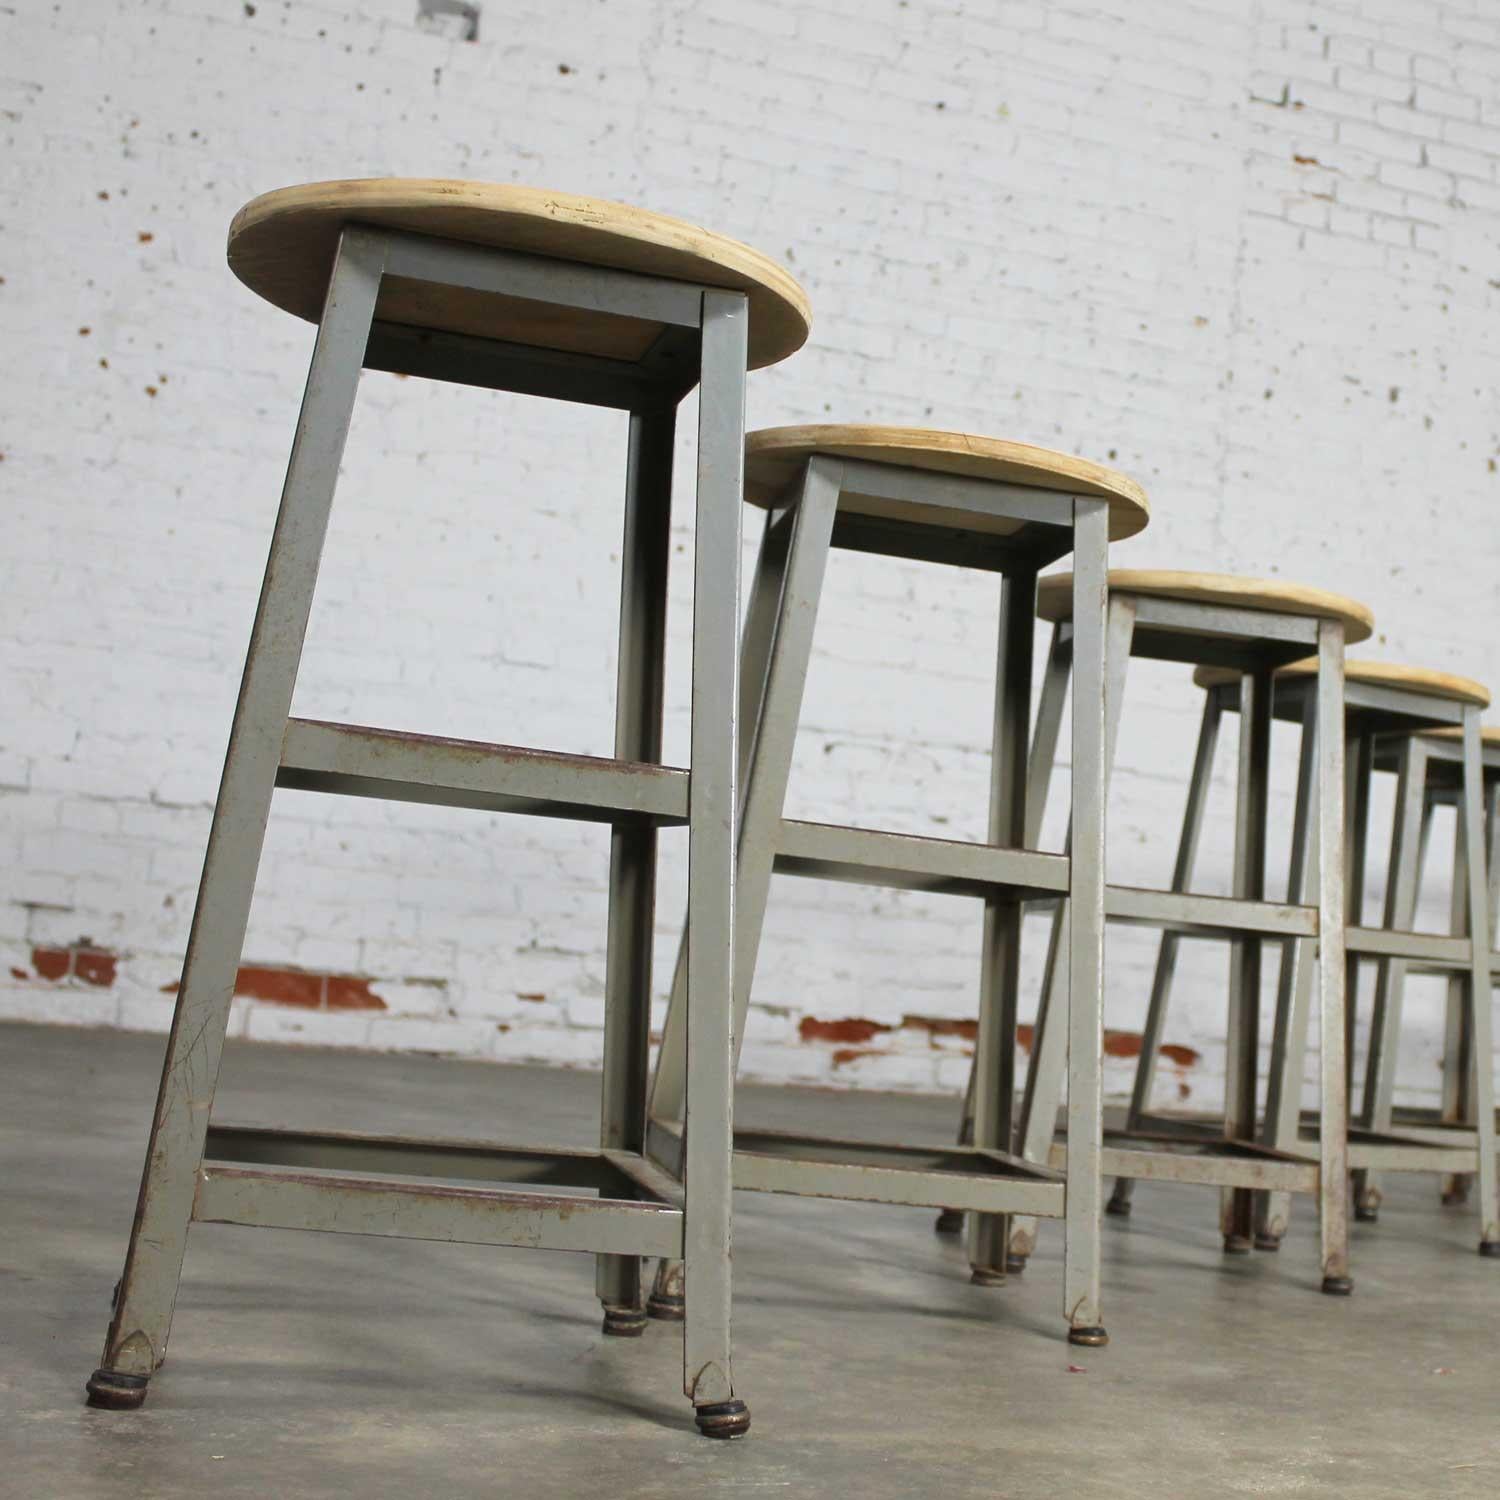 Vintage industrial counter height steel stools with fabulous patinated finish that only comes with age. In wonderful condition. The wood tops have been sanded and are ready to be oiled, clear coated, painted, or left natural to let age, circa